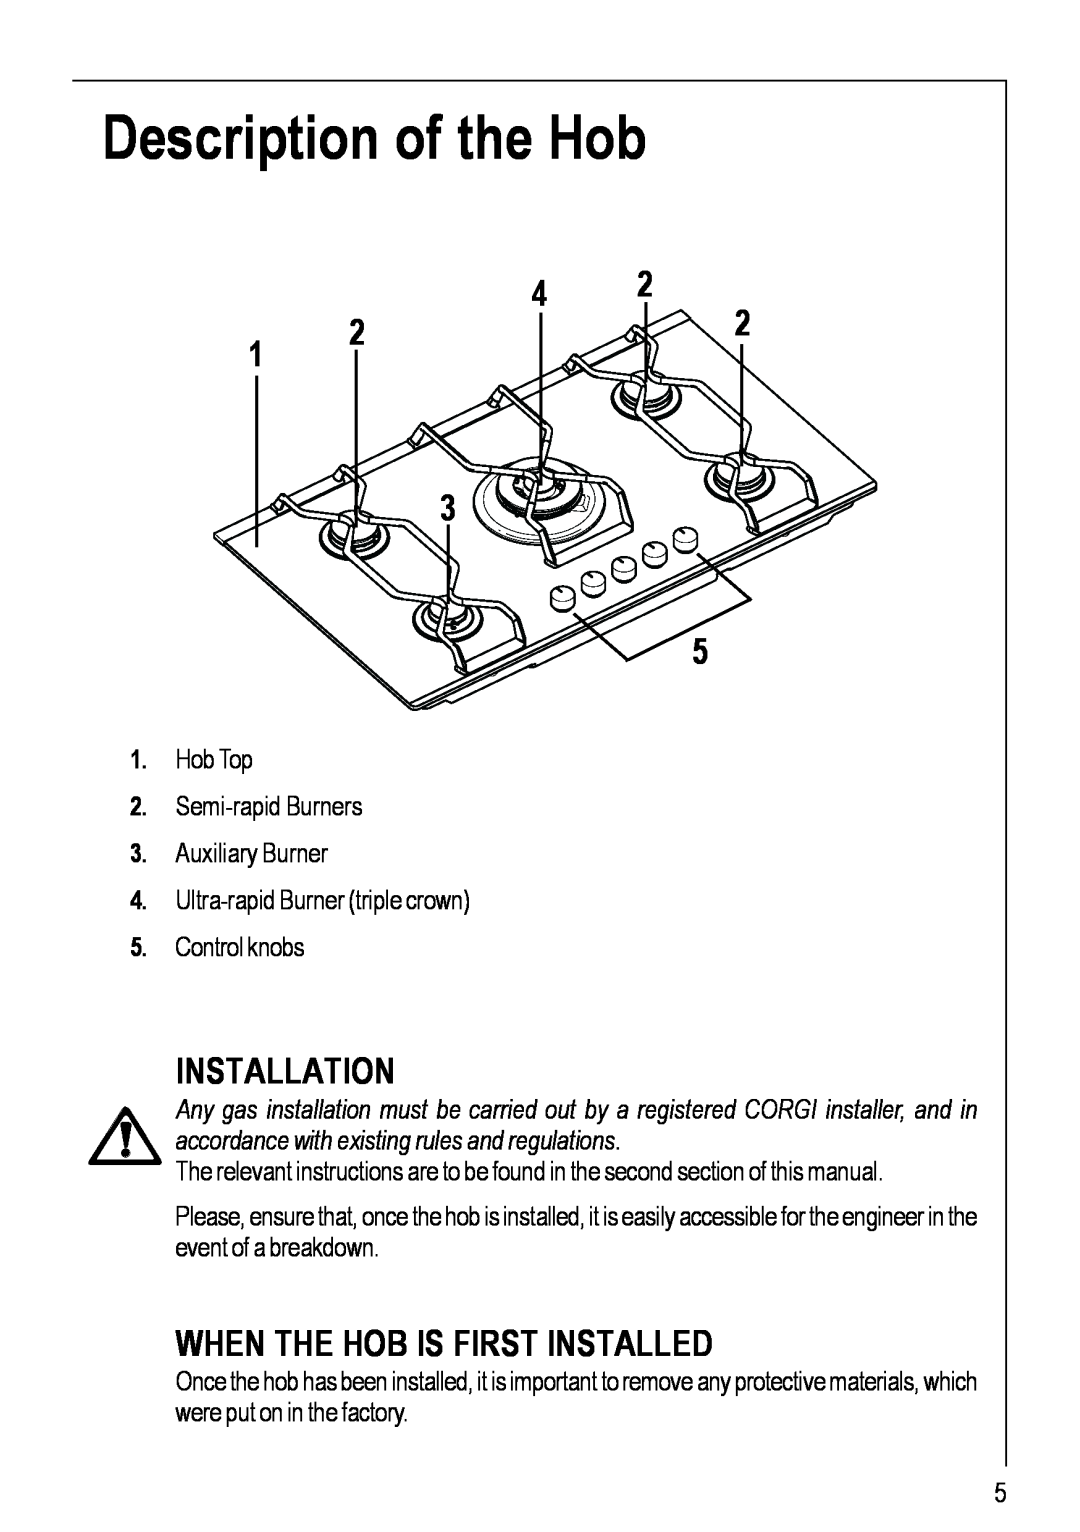 Electrolux 99852 G manual Description of the Hob, Installation, When The Hob Is First Installed 